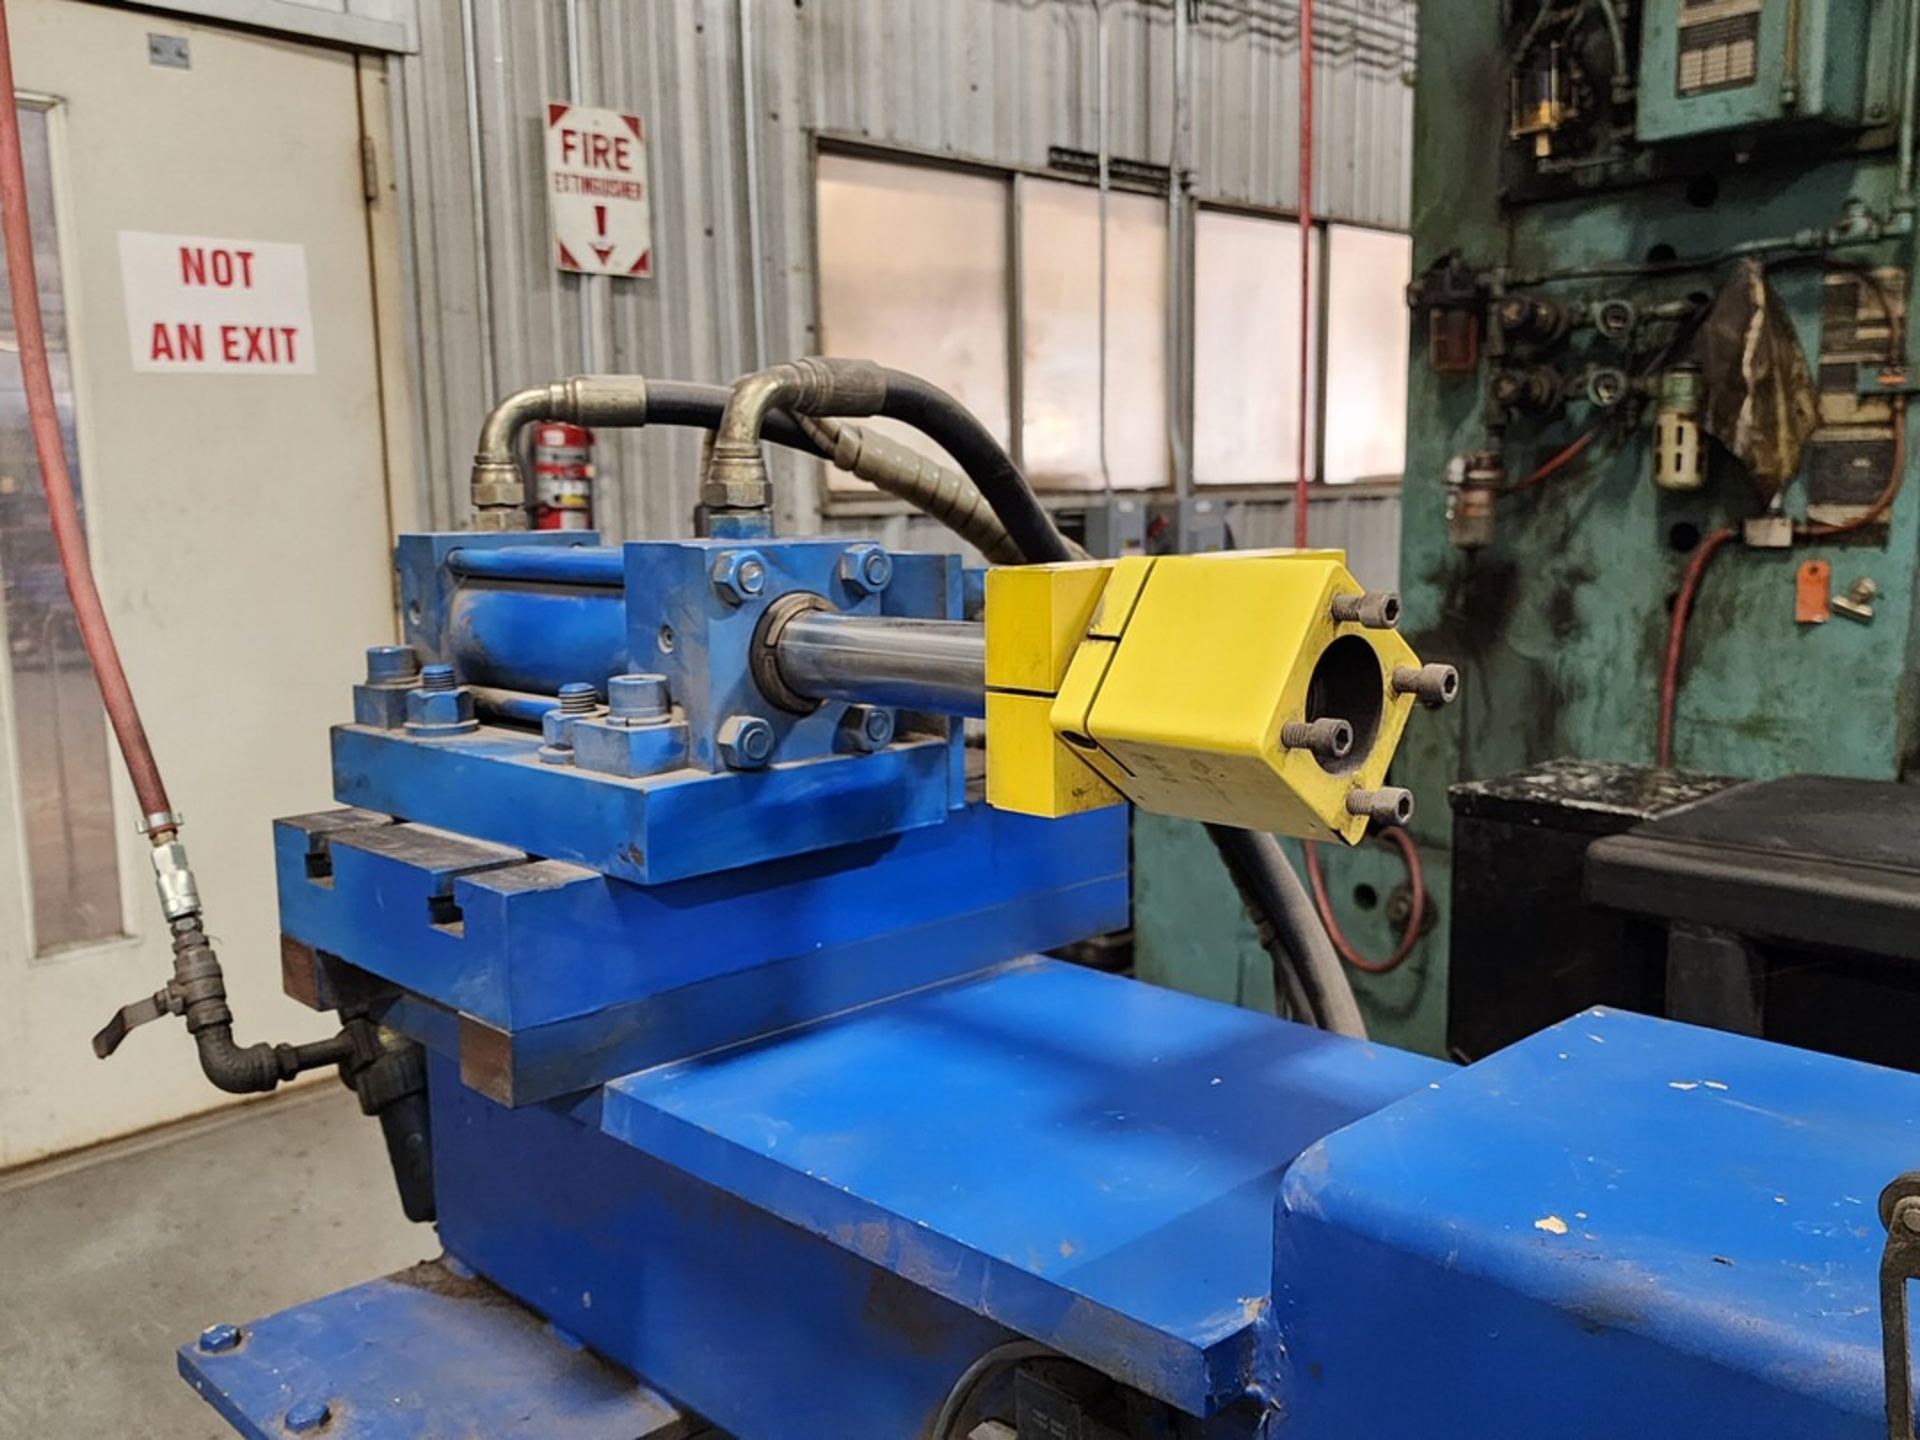 Horn CNC Hyd Tube Bender 1.5"; W/ Controller, DOM: 2006 - Image 13 of 15